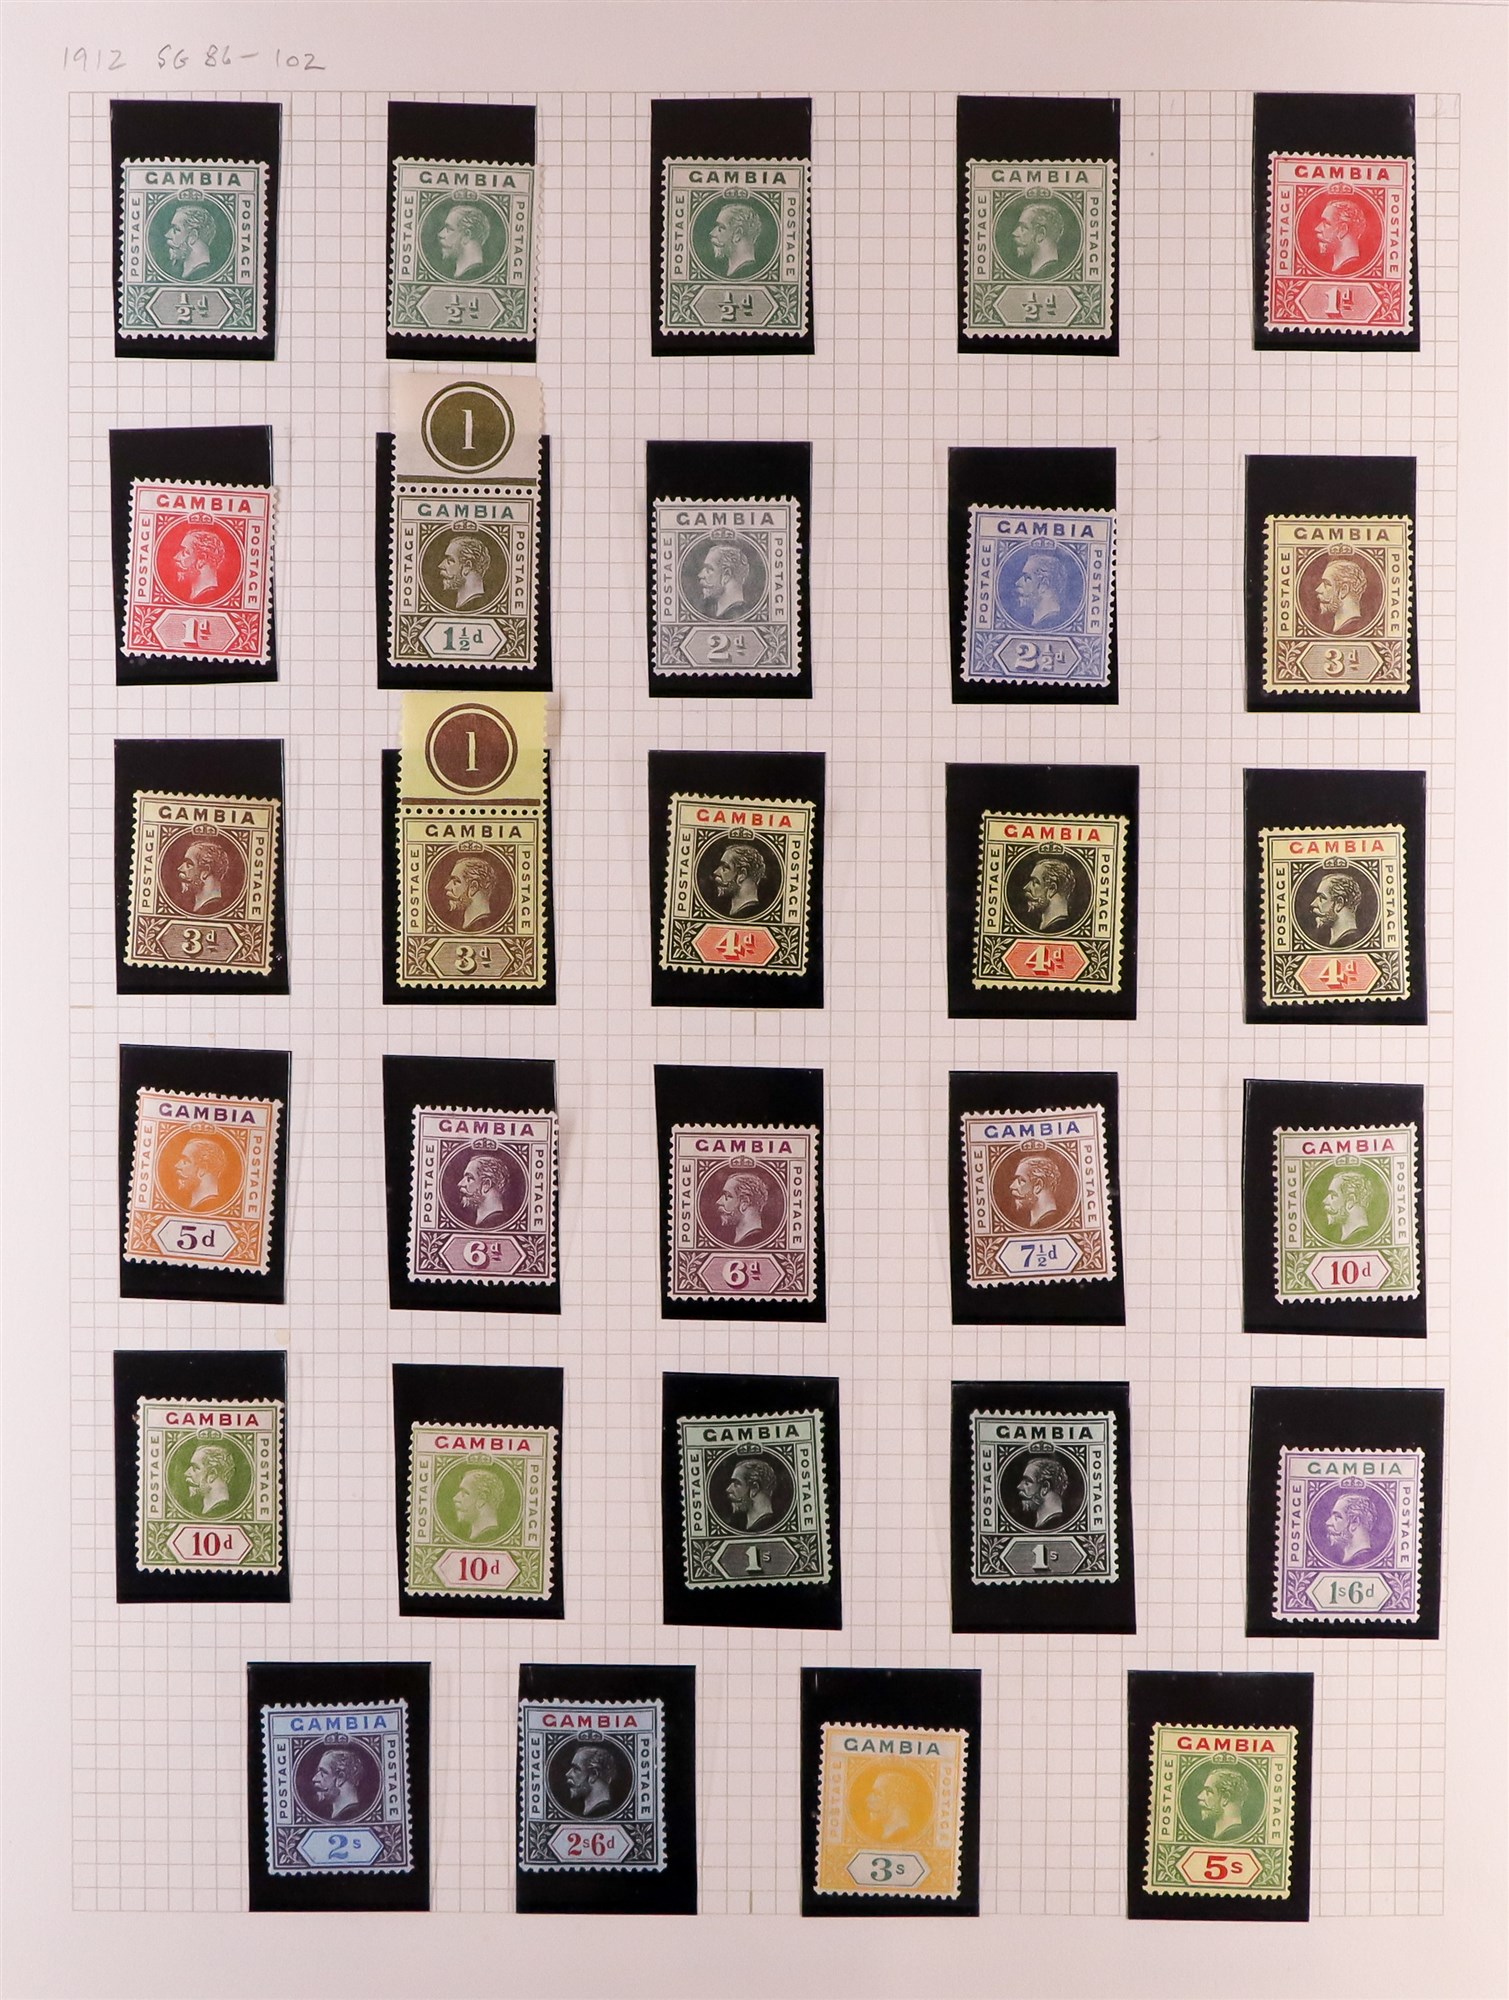 GAMBIA 1880 - 1935 COLLECTION incl. various Cameo issues mint, 1s violet used strip 3, 1902-05 set - Image 10 of 15